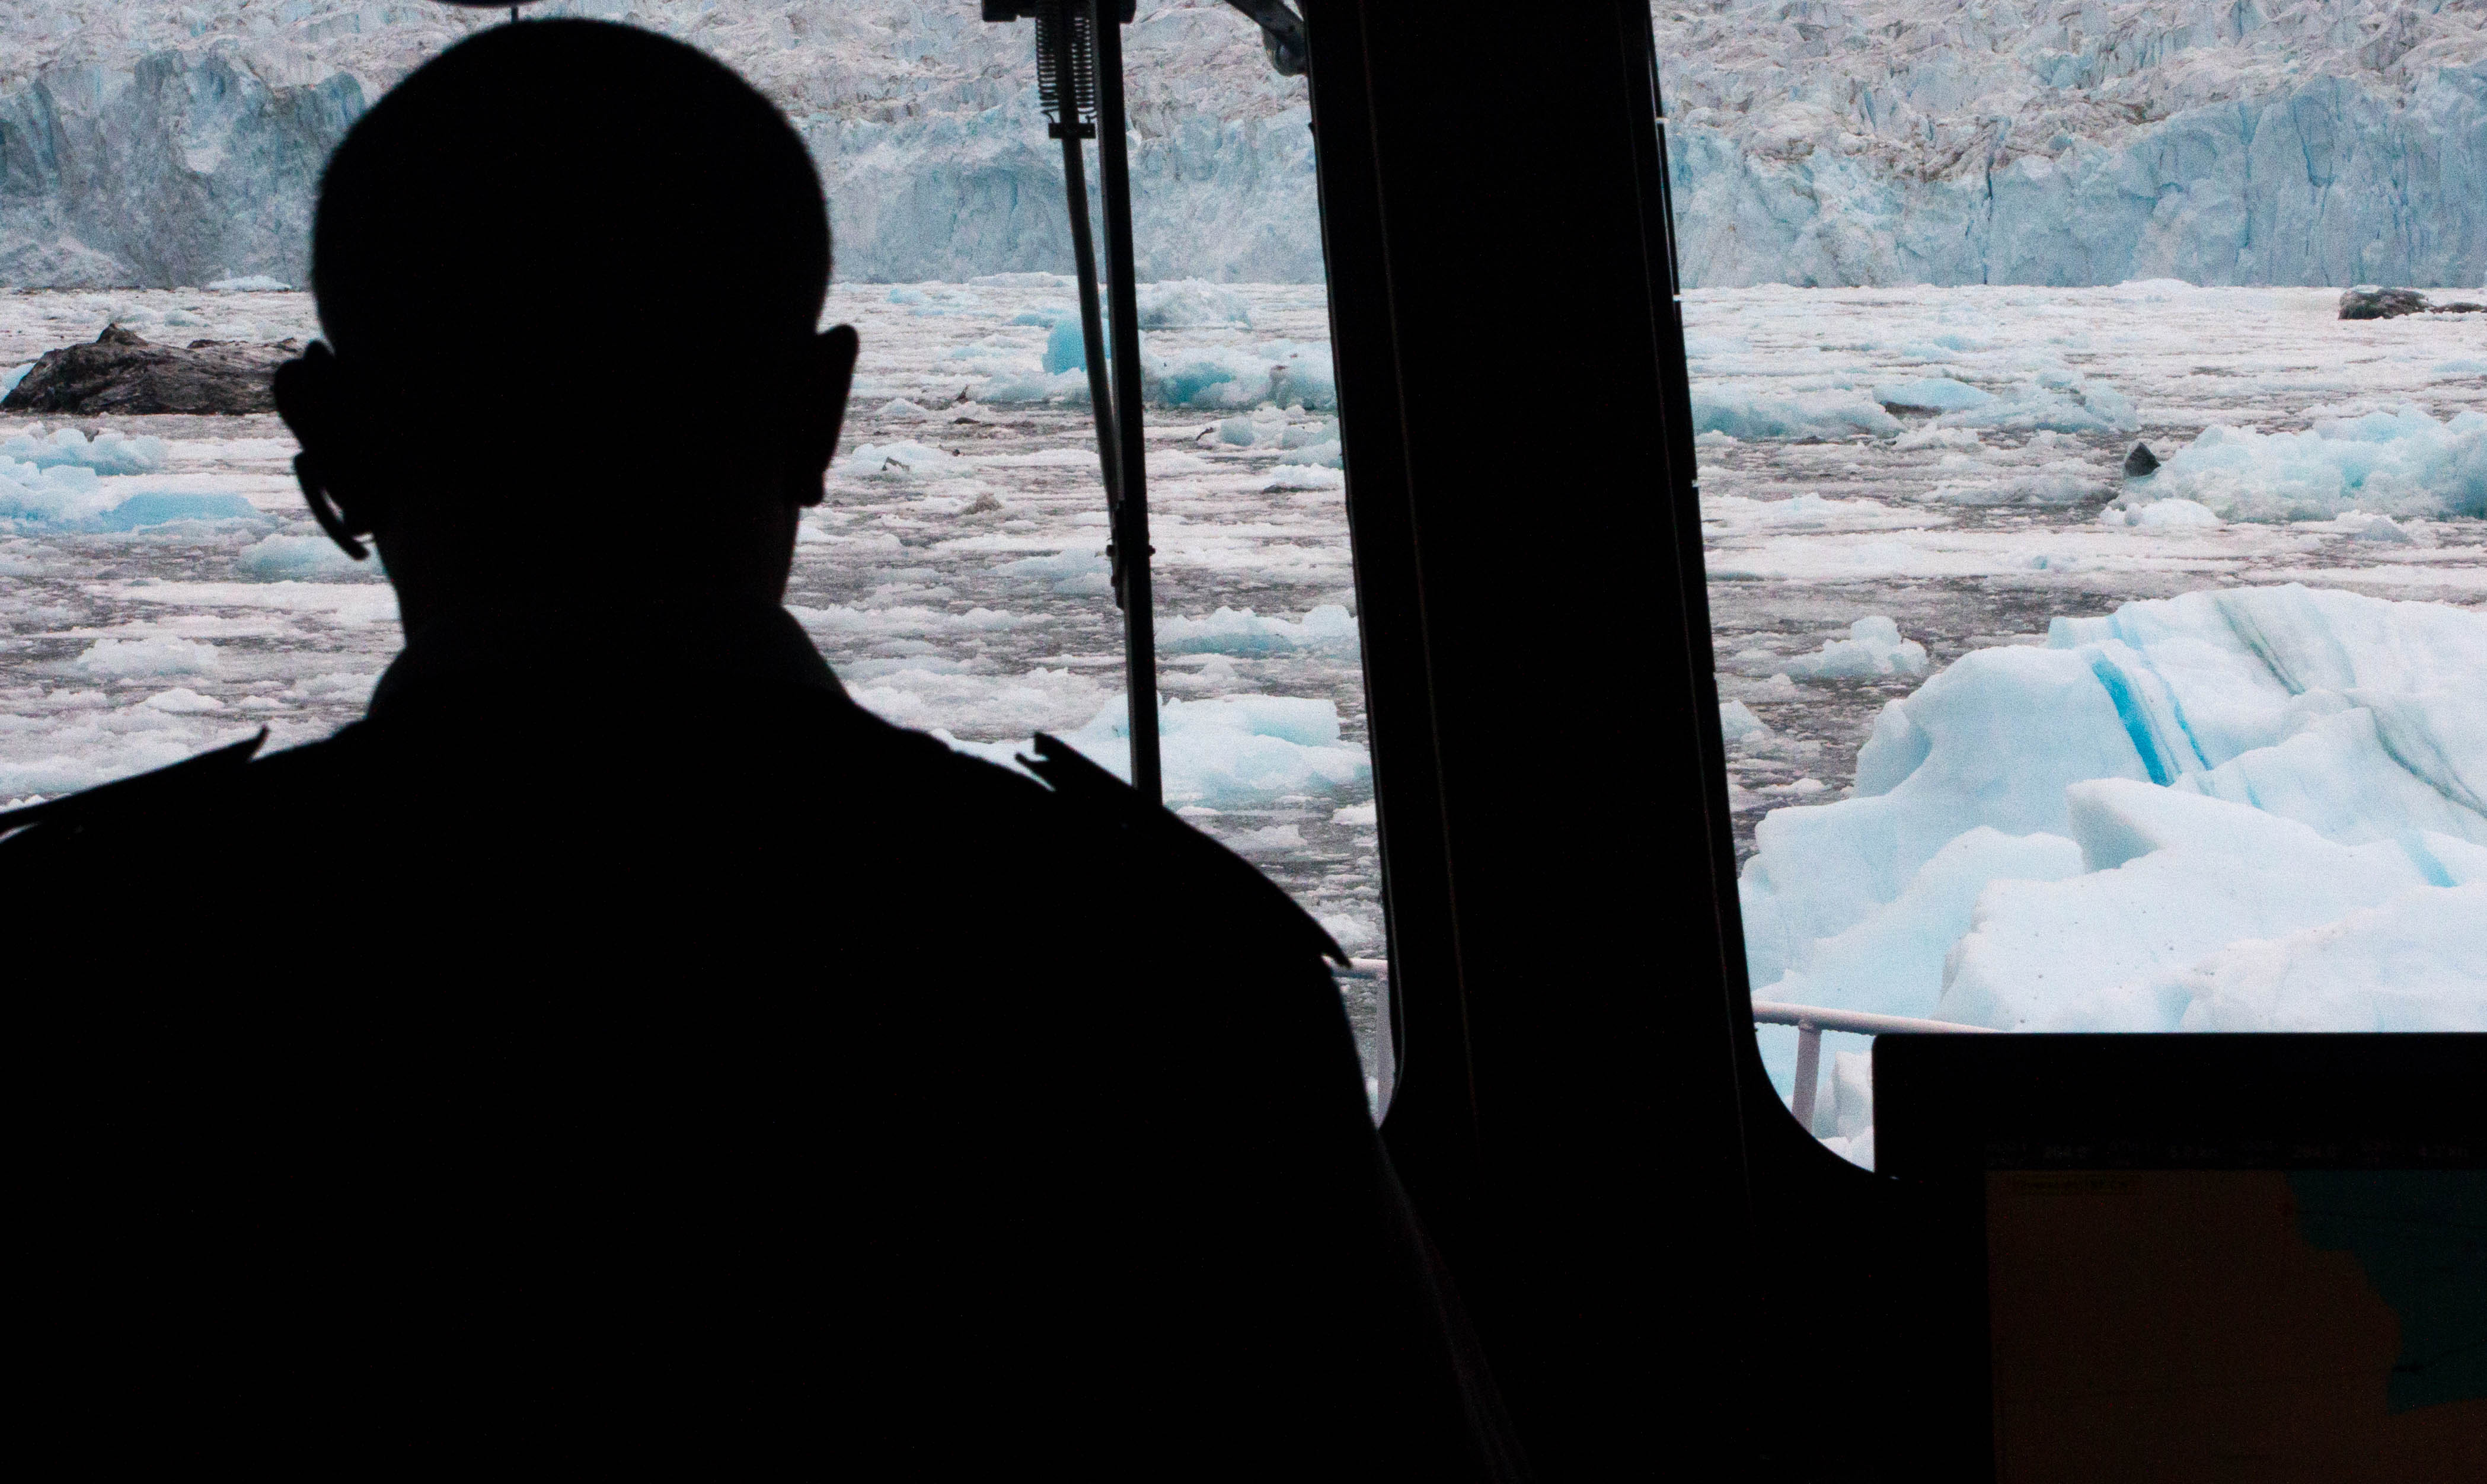 The Captain of the Ocean Nova traverses the ice-choked waters of Nordvestfjord